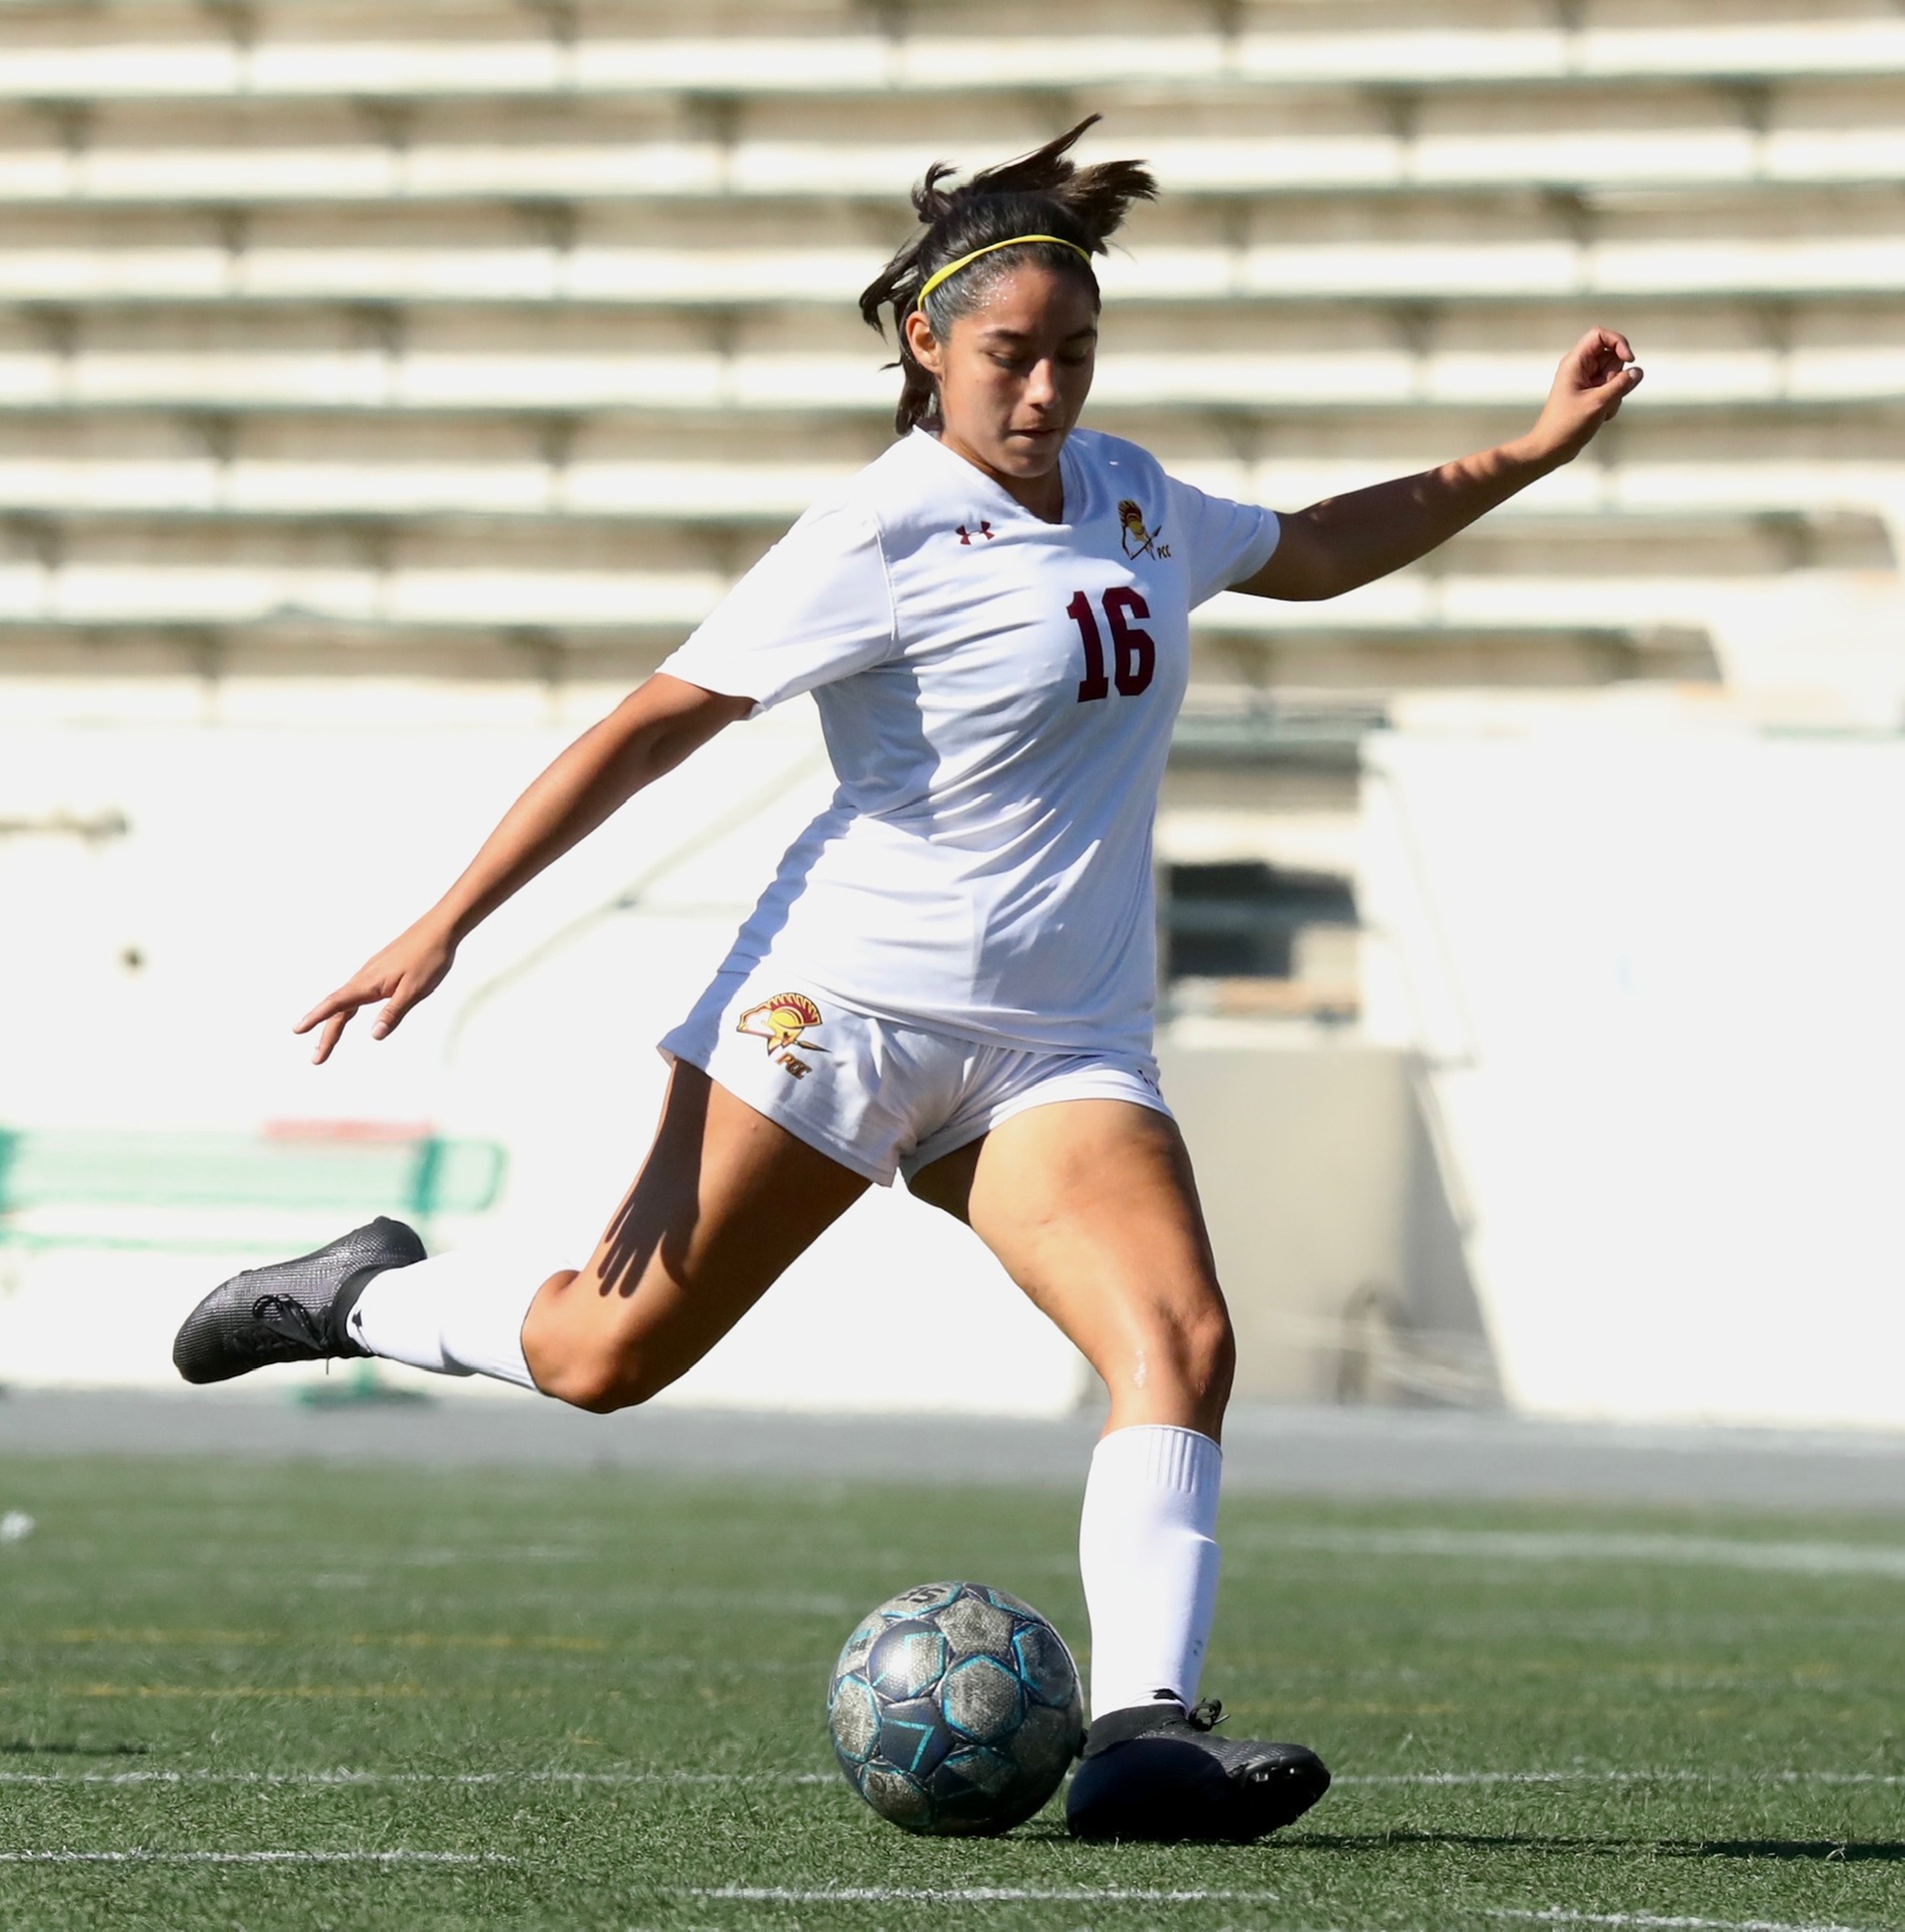 Andrea Sanchez puts her best foot forward to score one of her two goals in PCC's win at ELAC (photo by Michael Watkins).